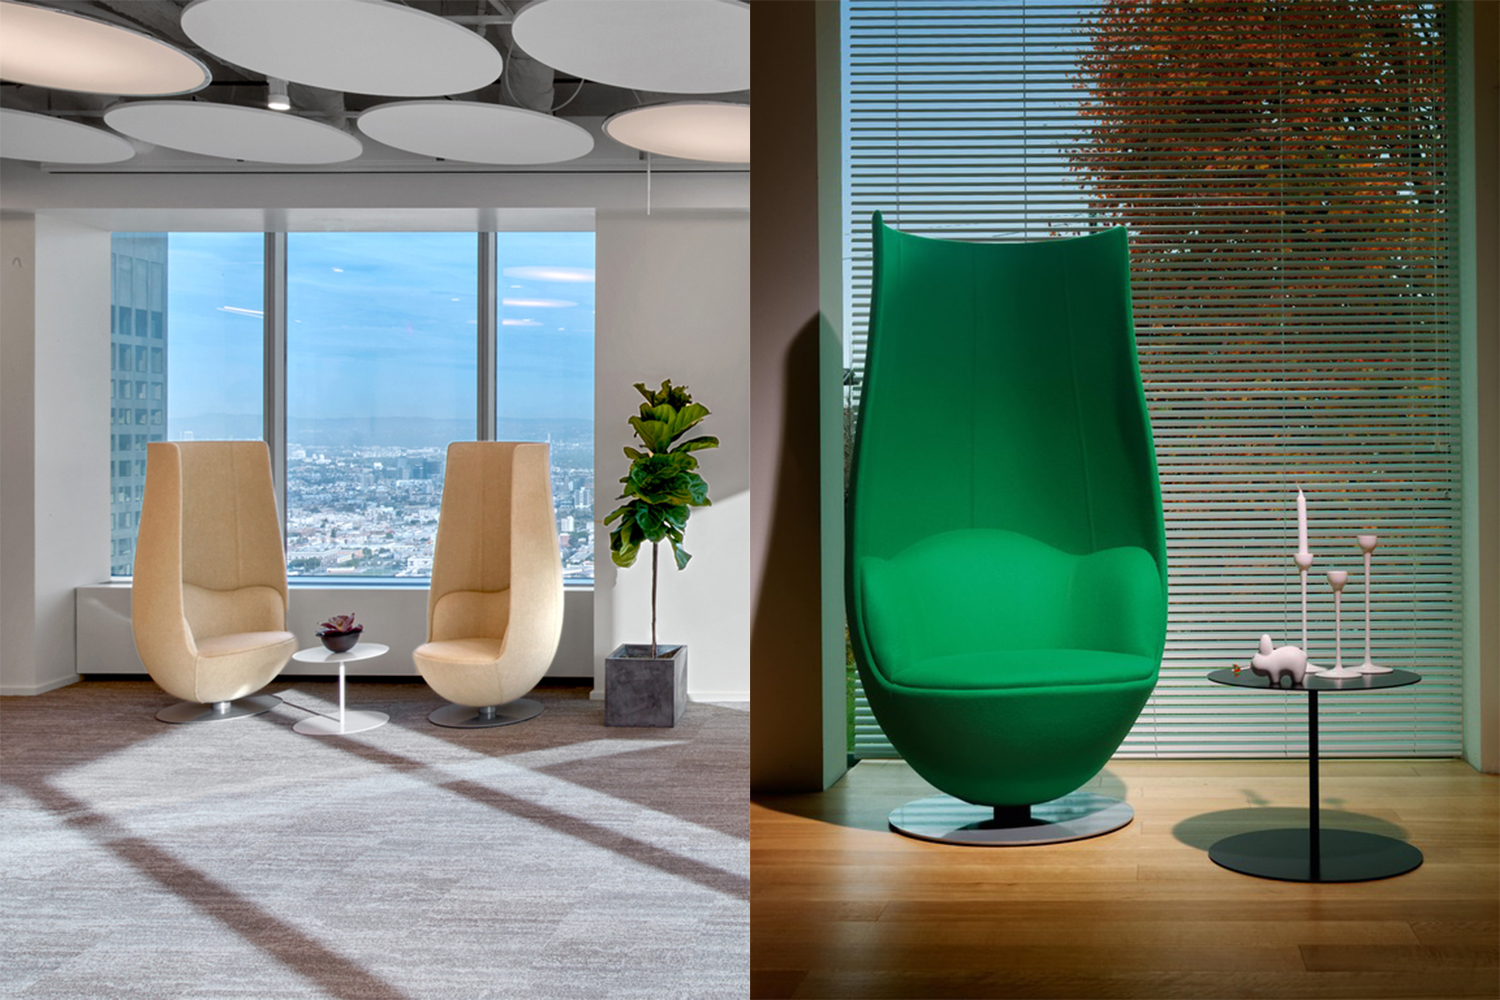 The Marcel Wanders Tulip Armchair, produced by Cappellini, seen in the left photograph in a beige and in the right photo in green